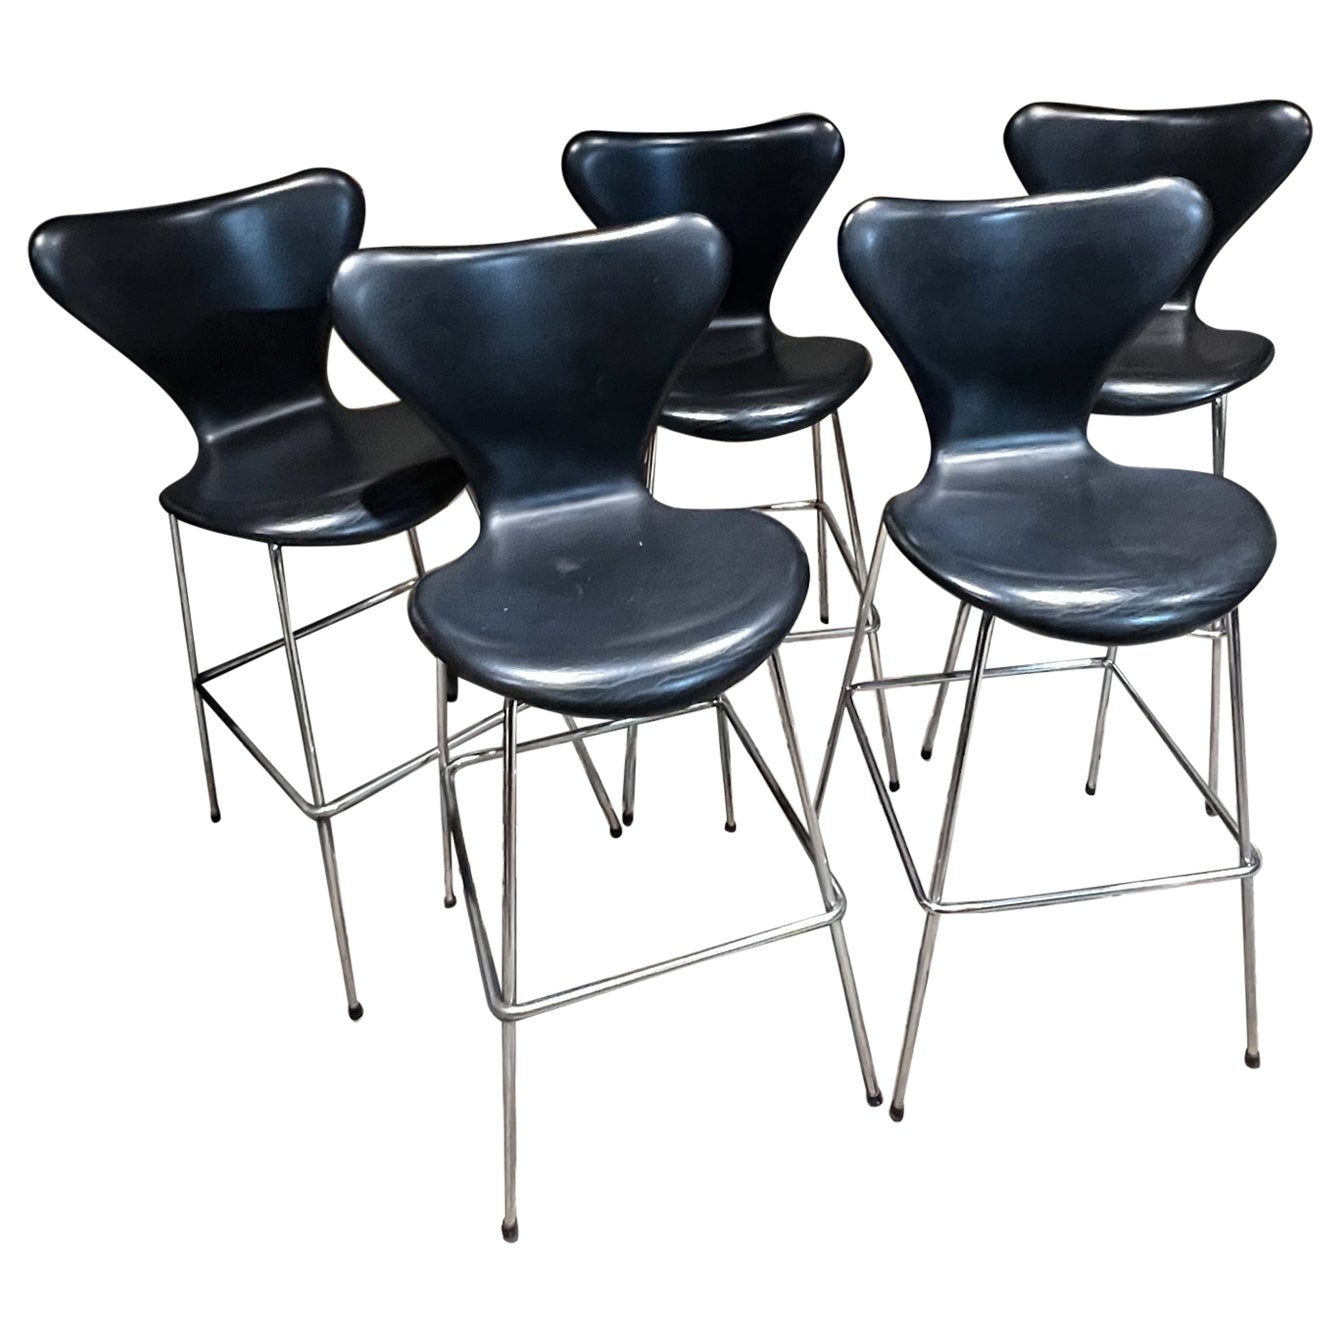 Vintage Series 7 bar stool 3197 chair designed by Arne Jacobsen in 1955 
Fritz Hansen
Listed Price is per unit. (Five stools are available)
44 tall x 20 width x 23 depth, Seat 30.5 tall with Footrest 14.5
Republic of Fritz Hansen Denmark Design Arne